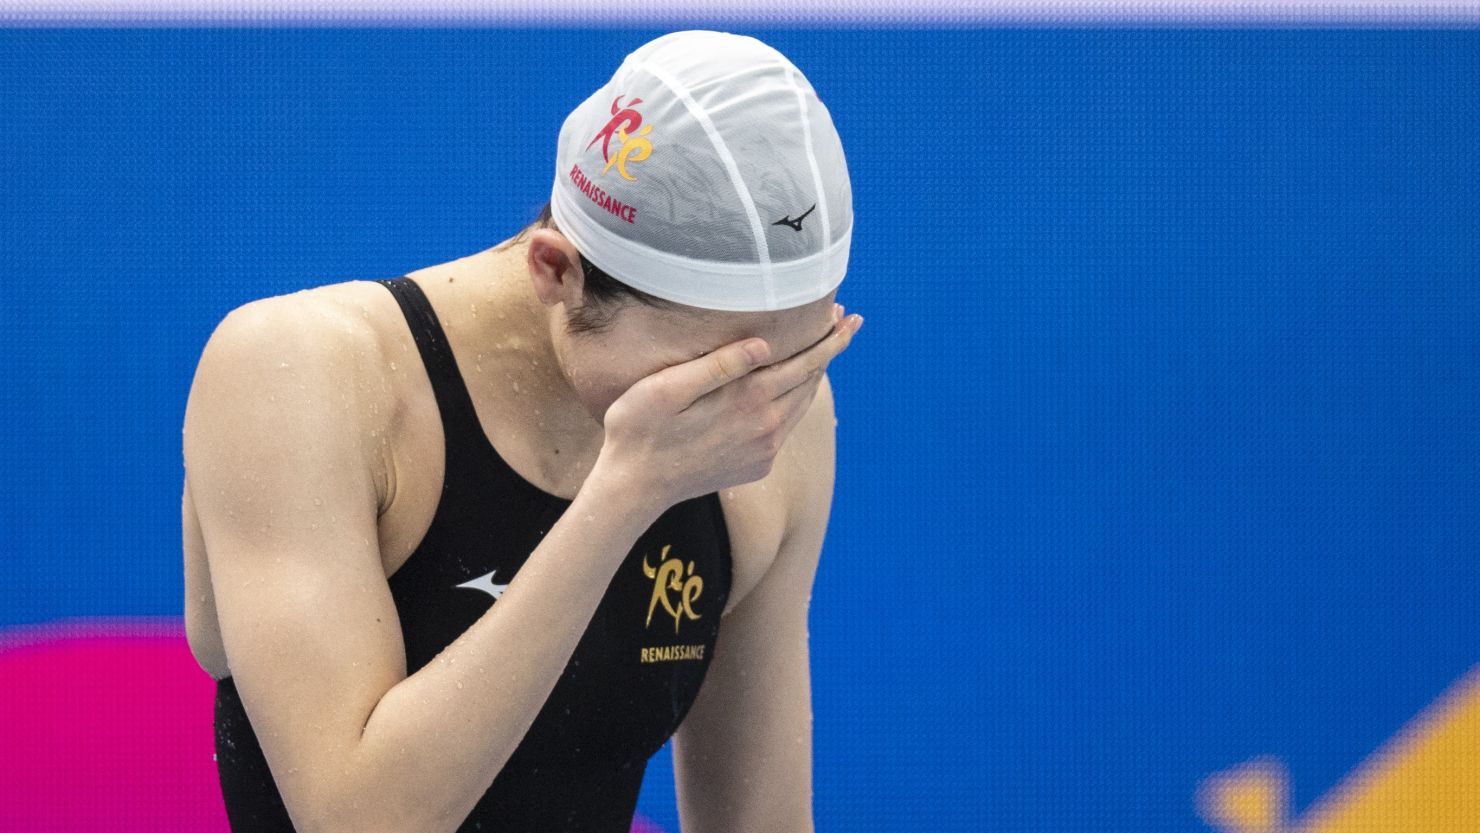 Rikako Ikee reacts to winning the 100m butterfly final at the Japan national swimming championships.